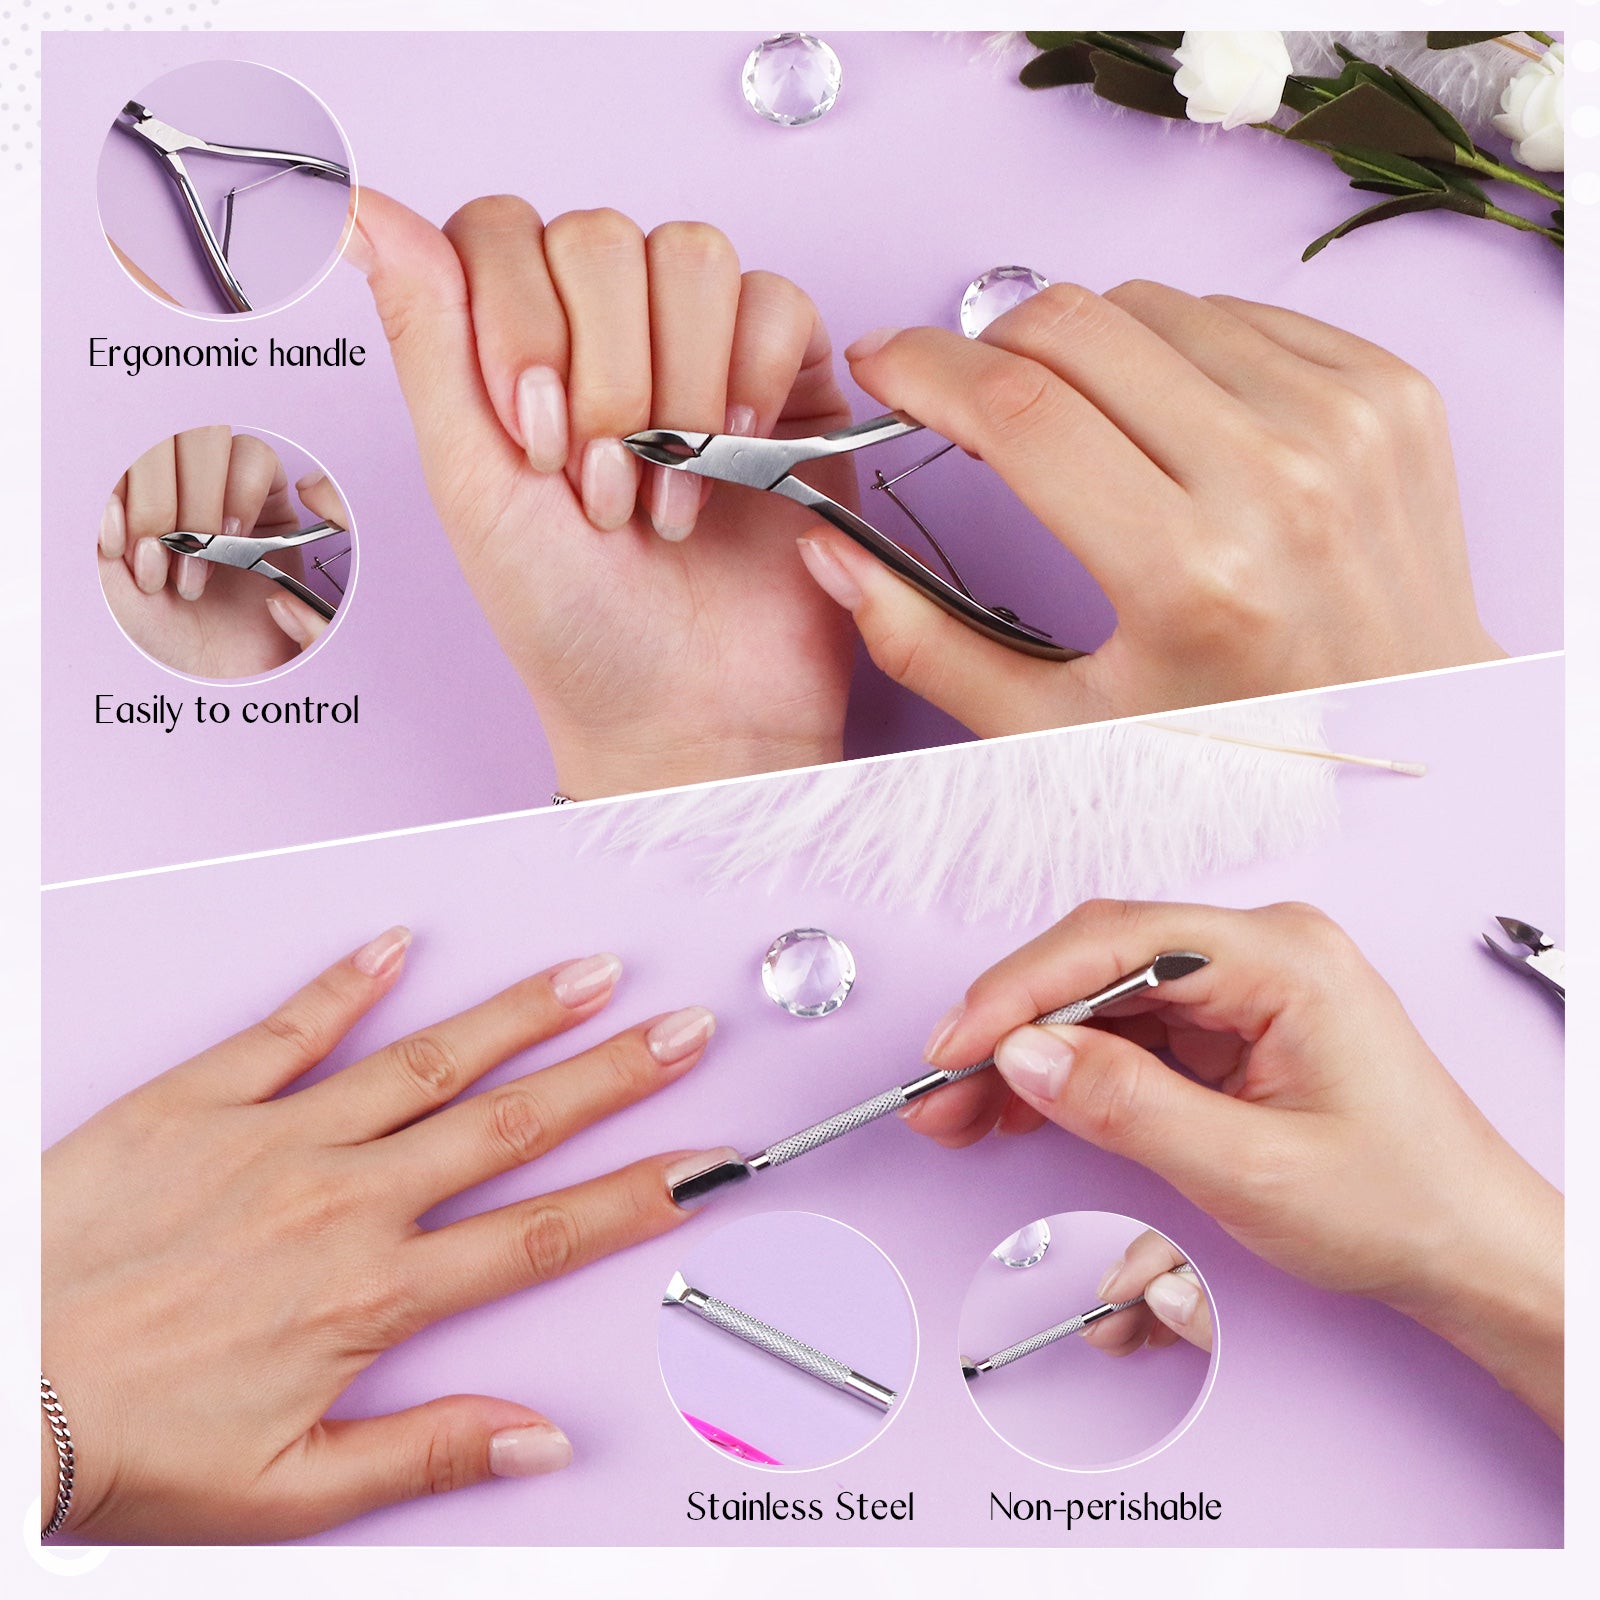 [US ONLY]Cuticle Remover Kit with Cuticle Pusher Trimmer Nipper